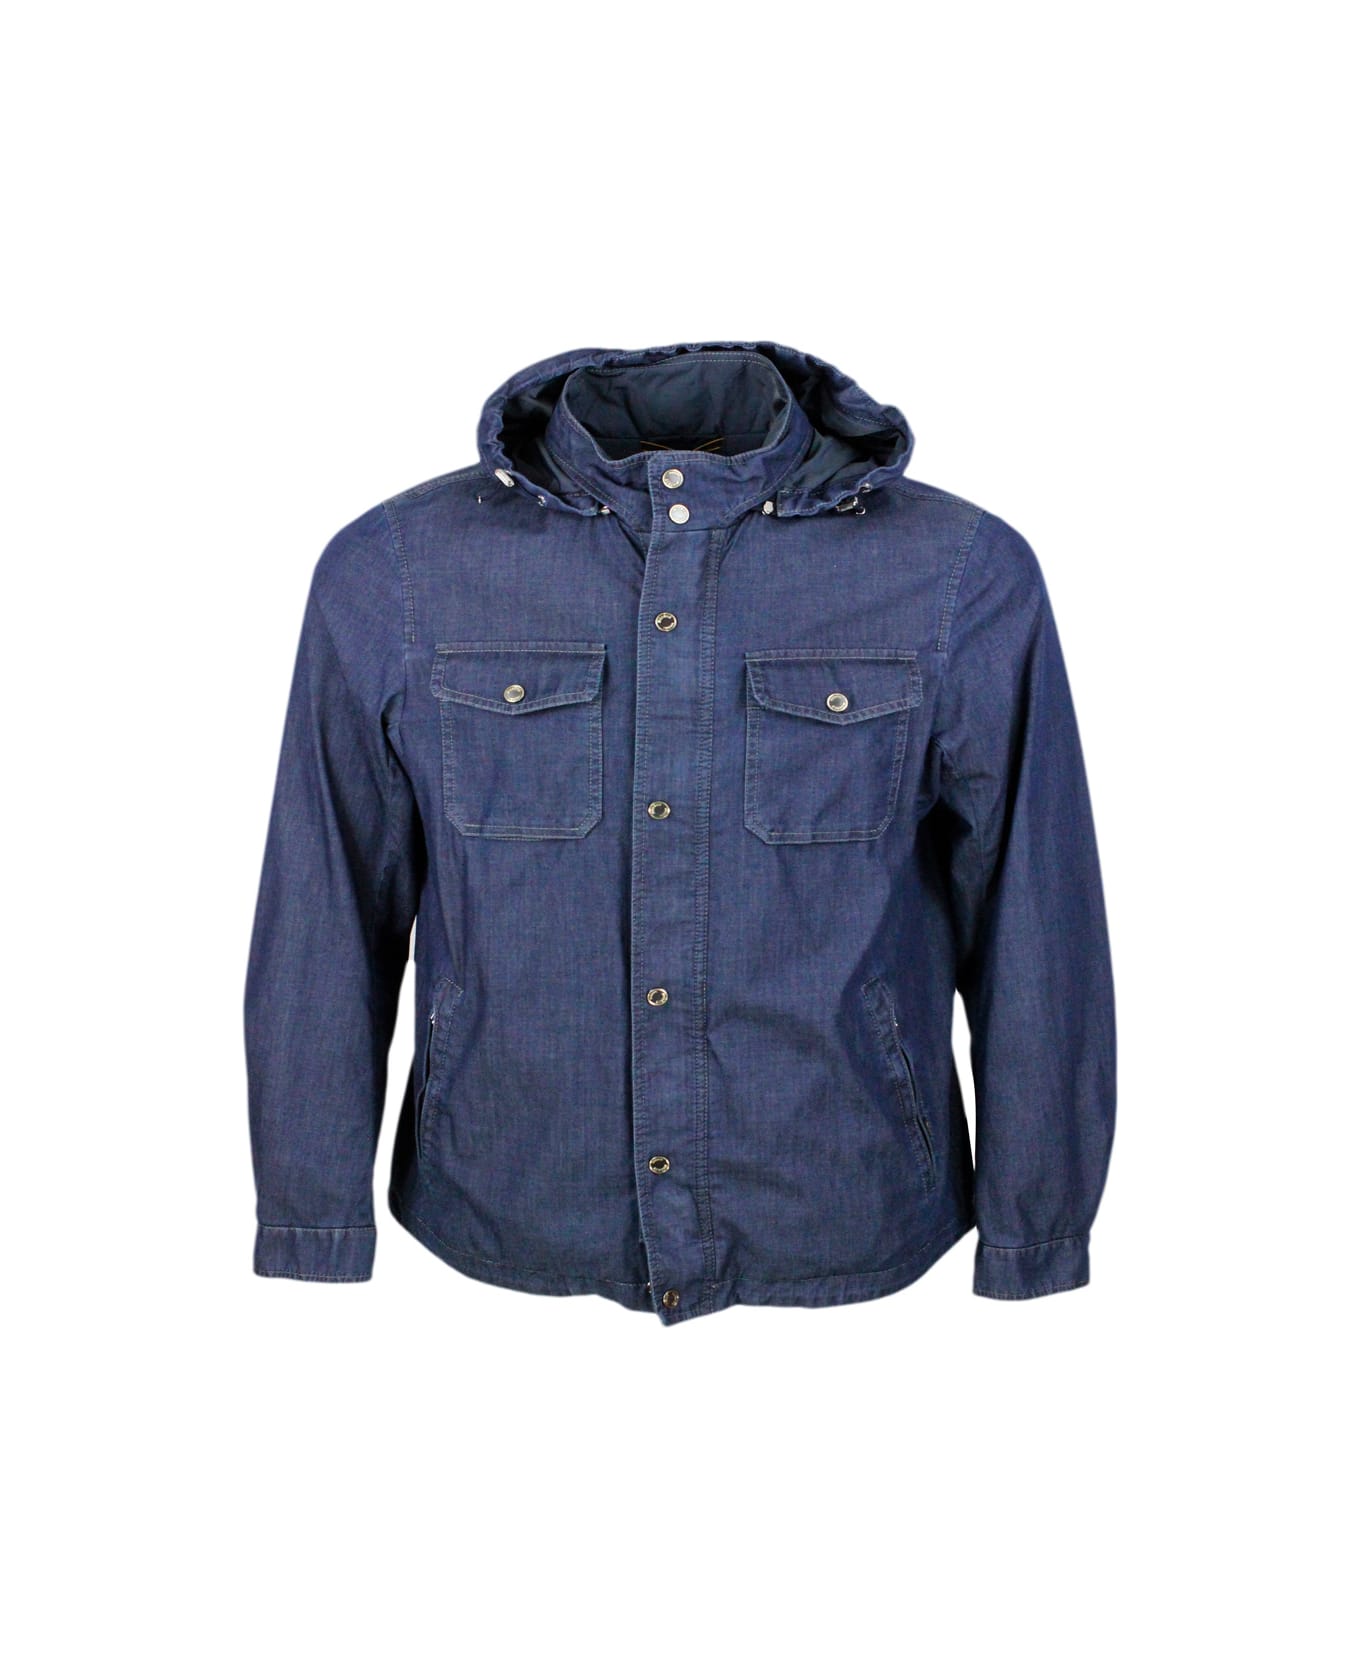 Moorer Anorak Shirt Jacket From The Water Proof Line With 2 Umbrellas With Detachable Hood In Light And Soft Denim-effect Smooth Menbrazed Fabric - Denim